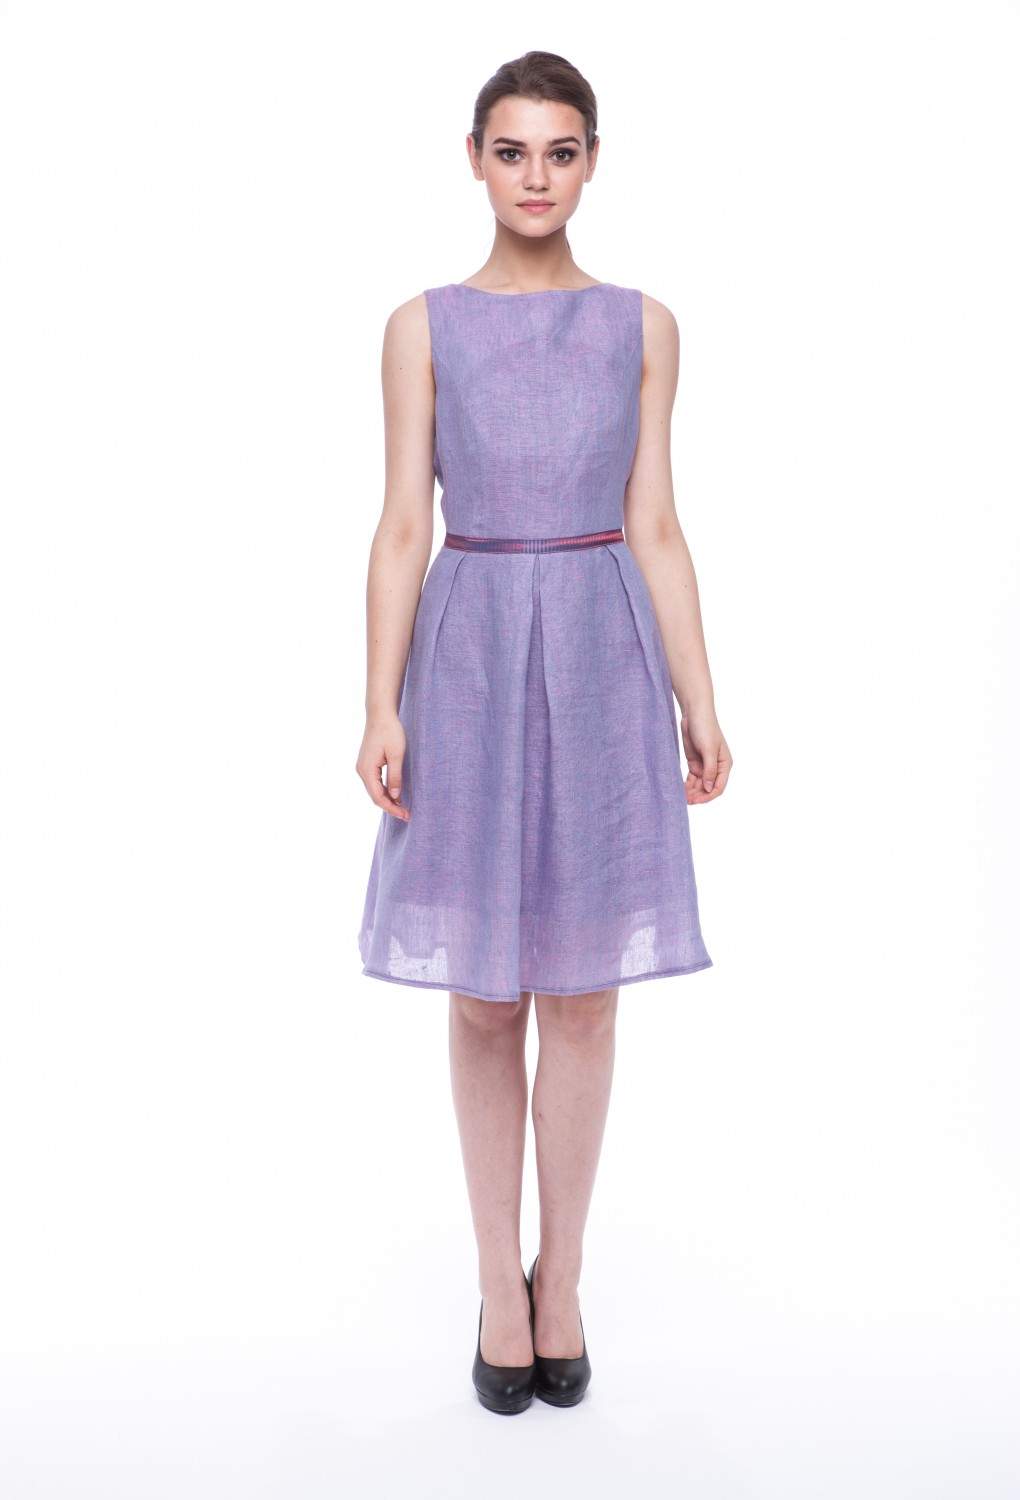 Women dress Violet without sleeves